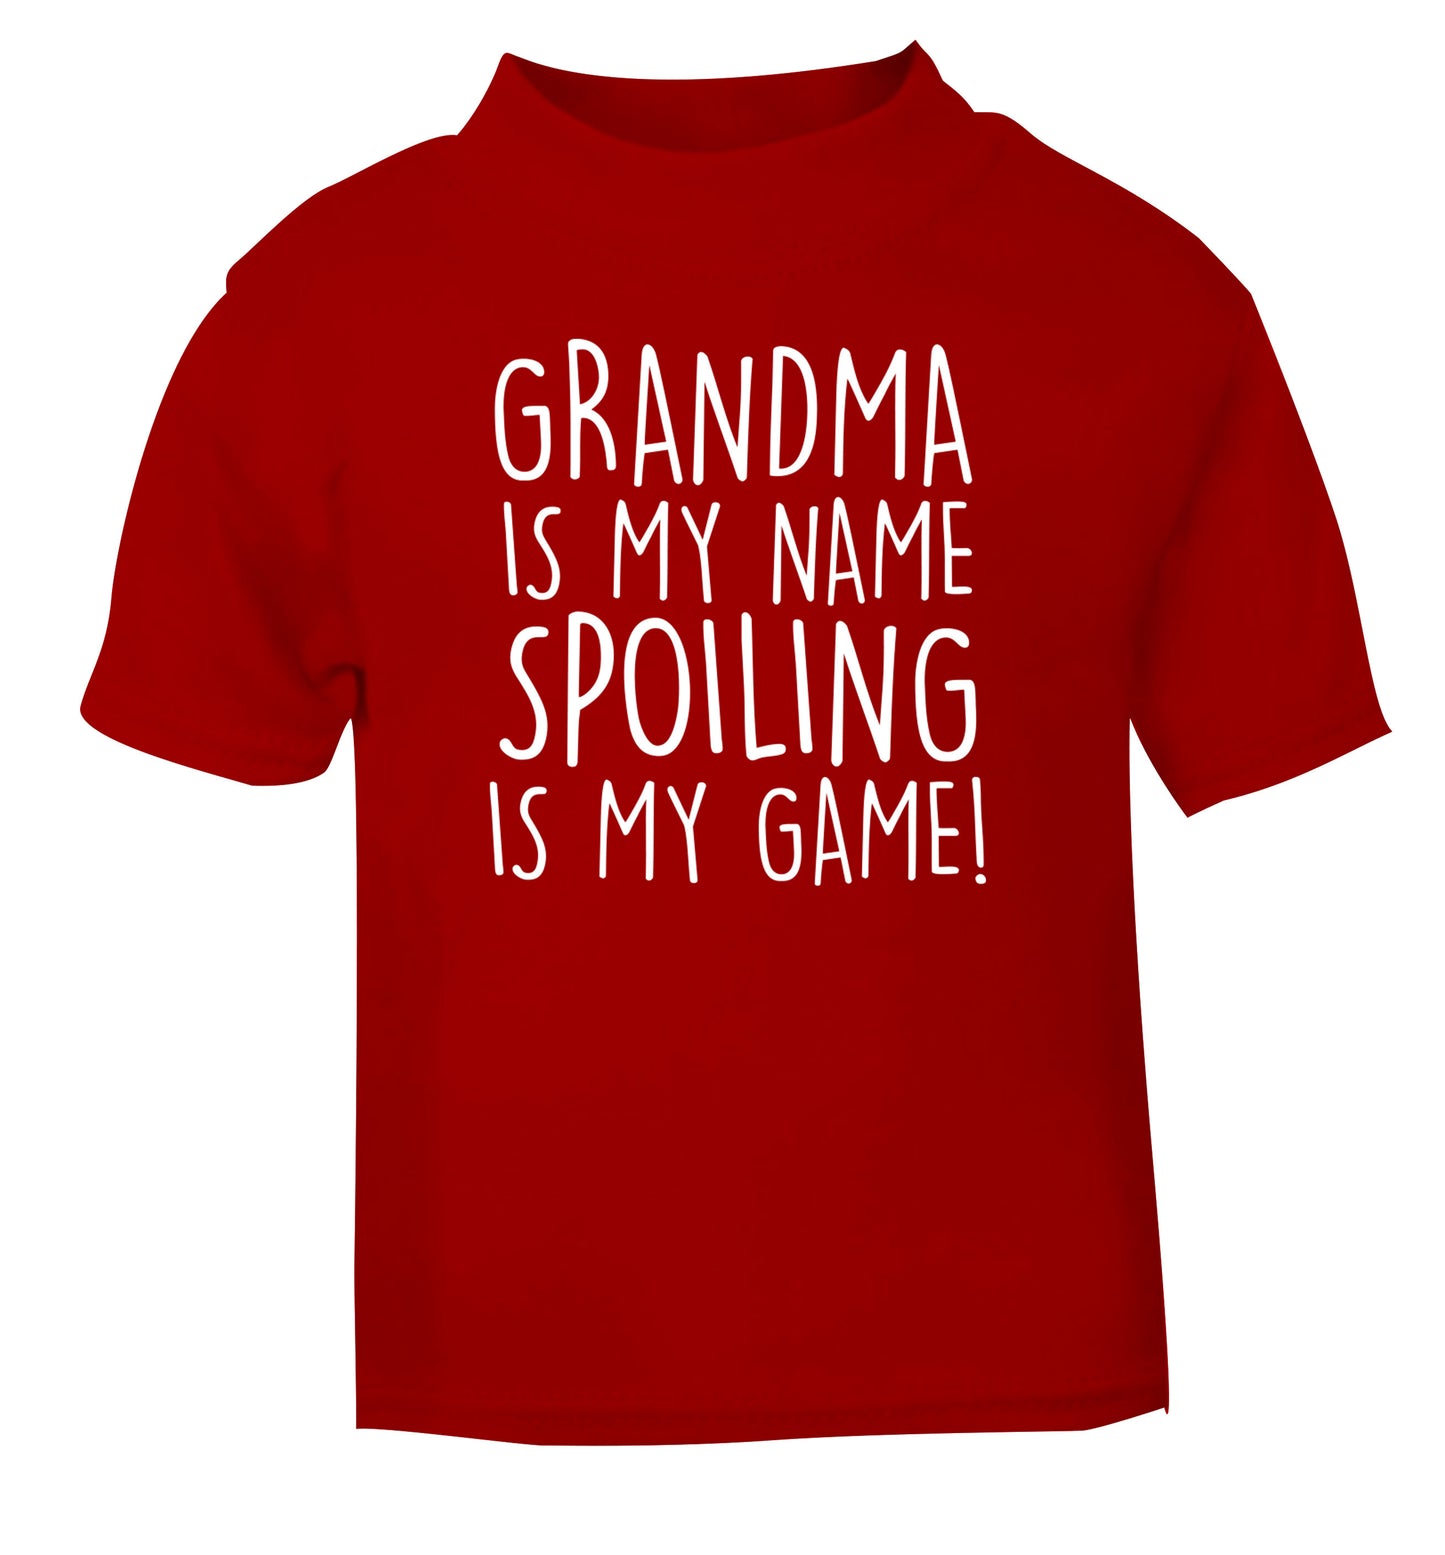 Grandma is my name, spoiling is my game red Baby Toddler Tshirt 2 Years